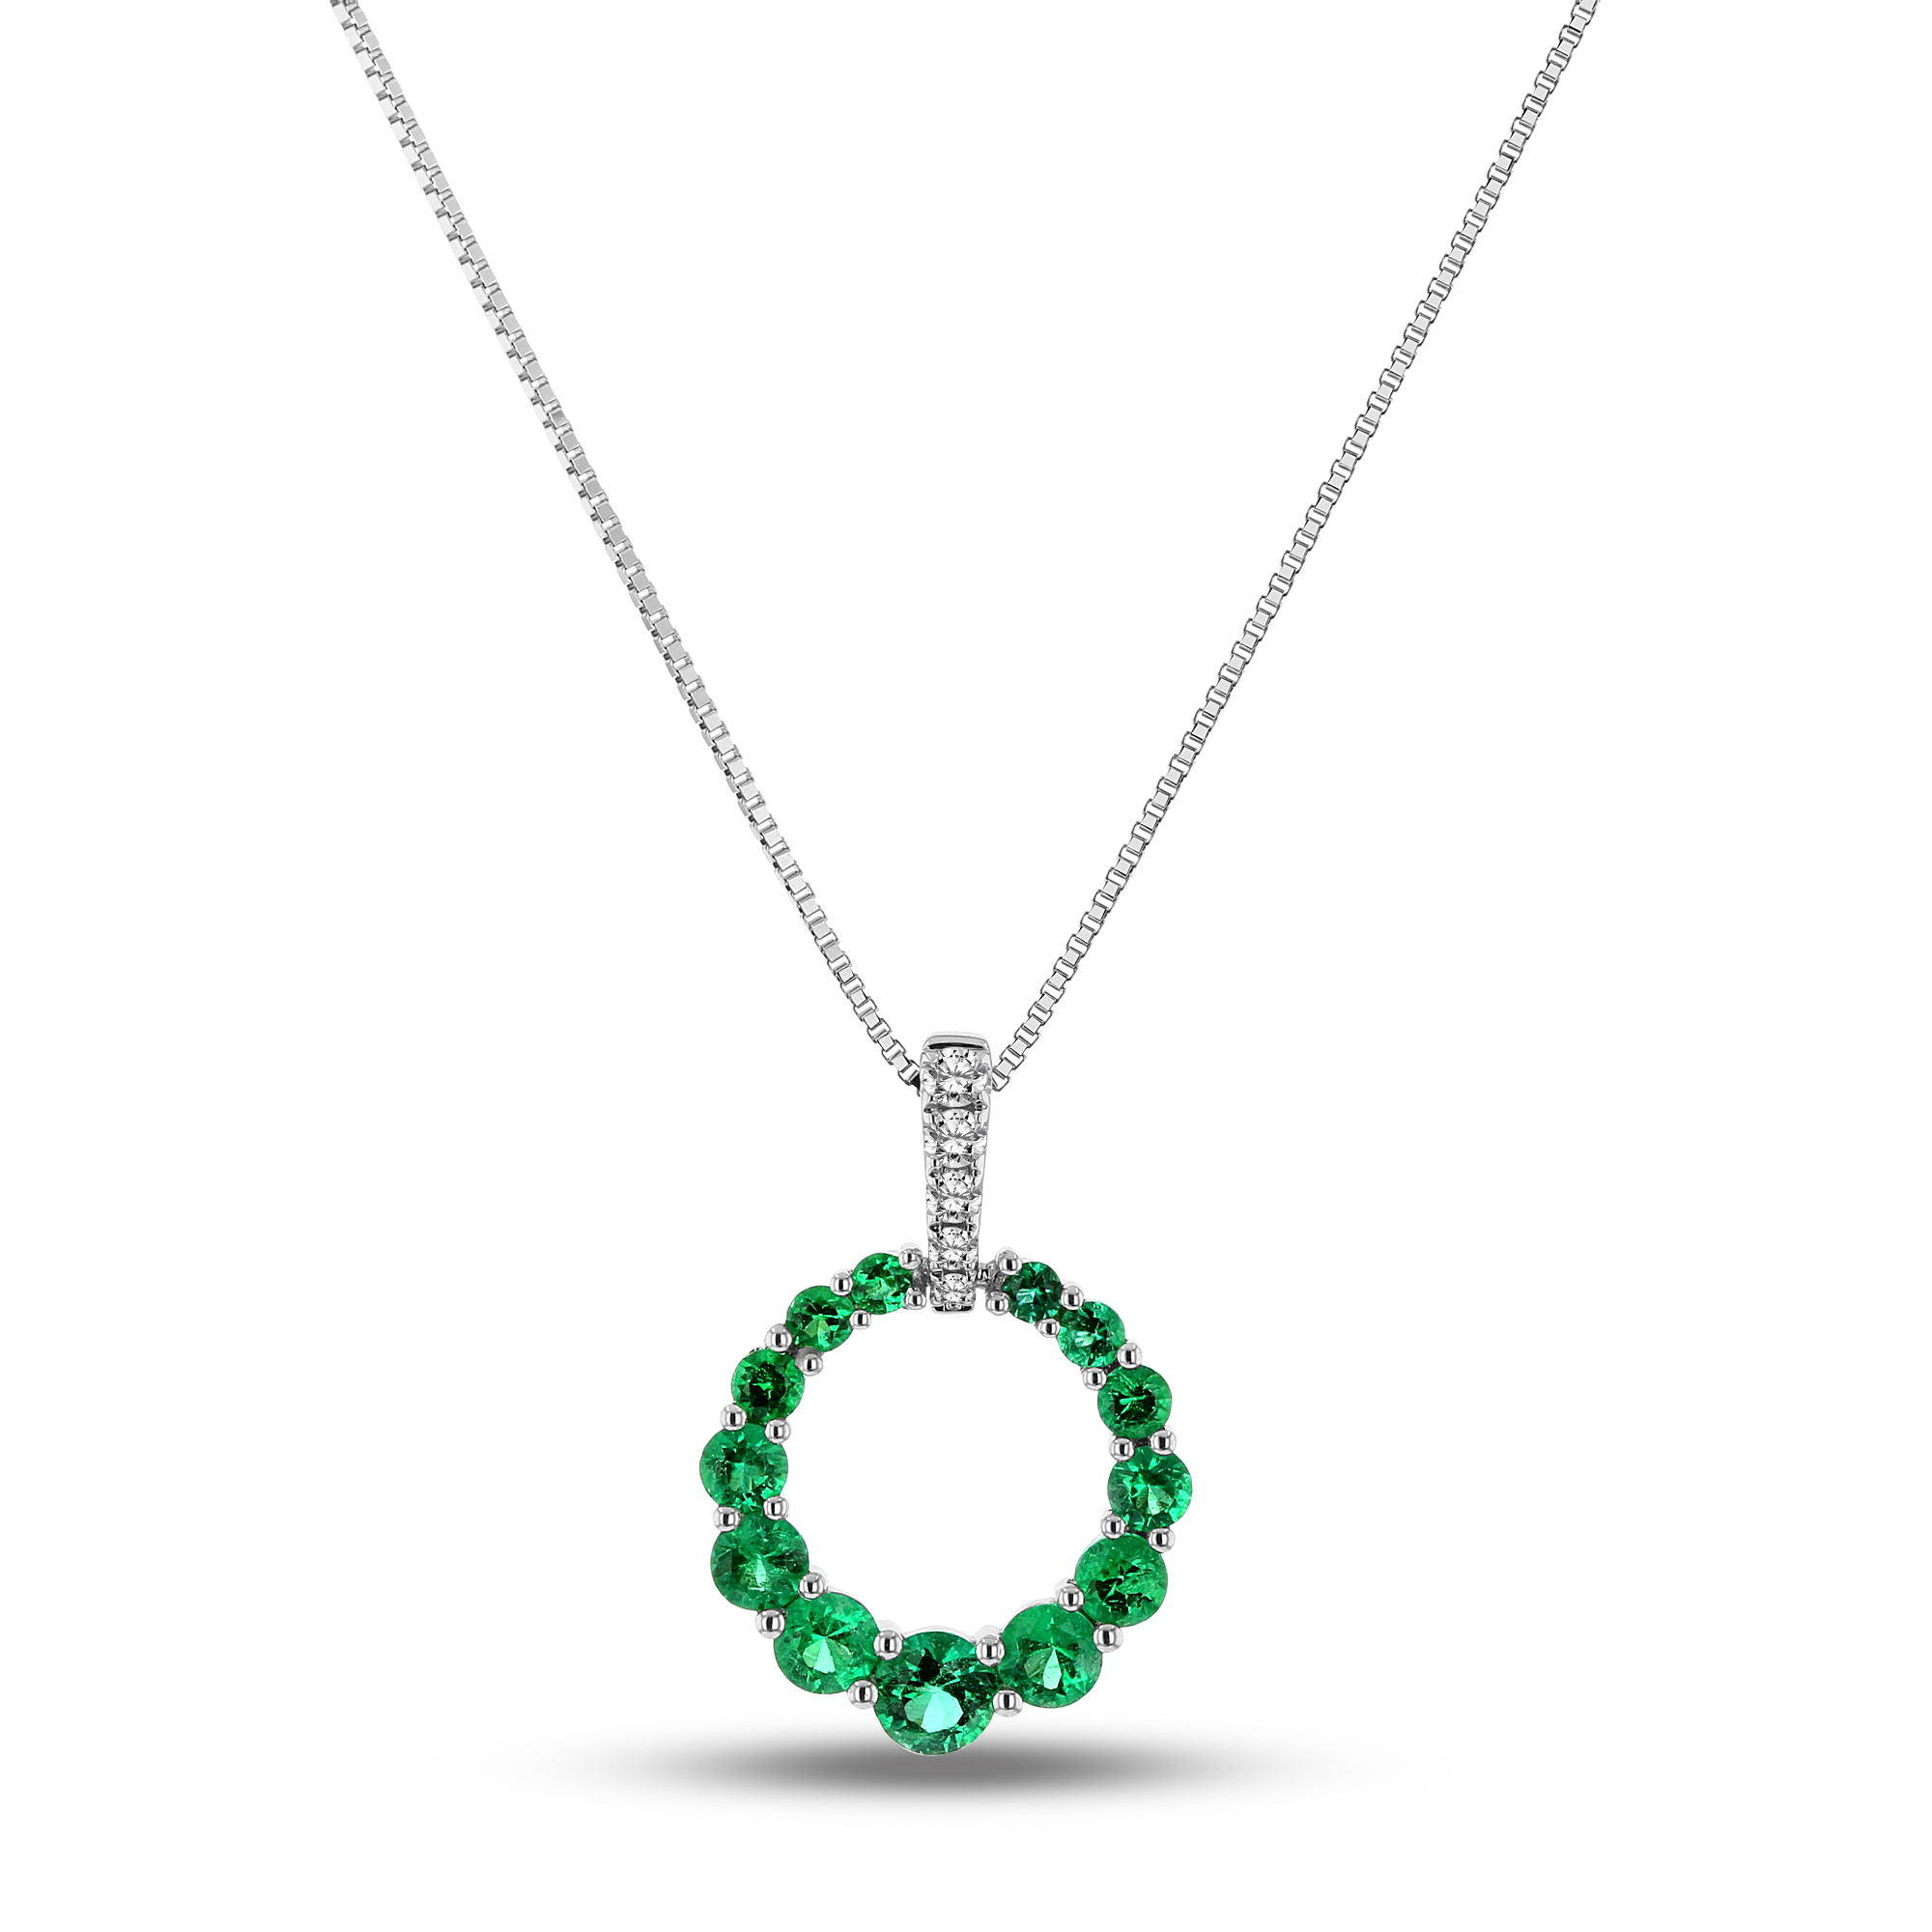 View 0.05ctw Diamond and Emerald Circle Pendant in 18k White Gold